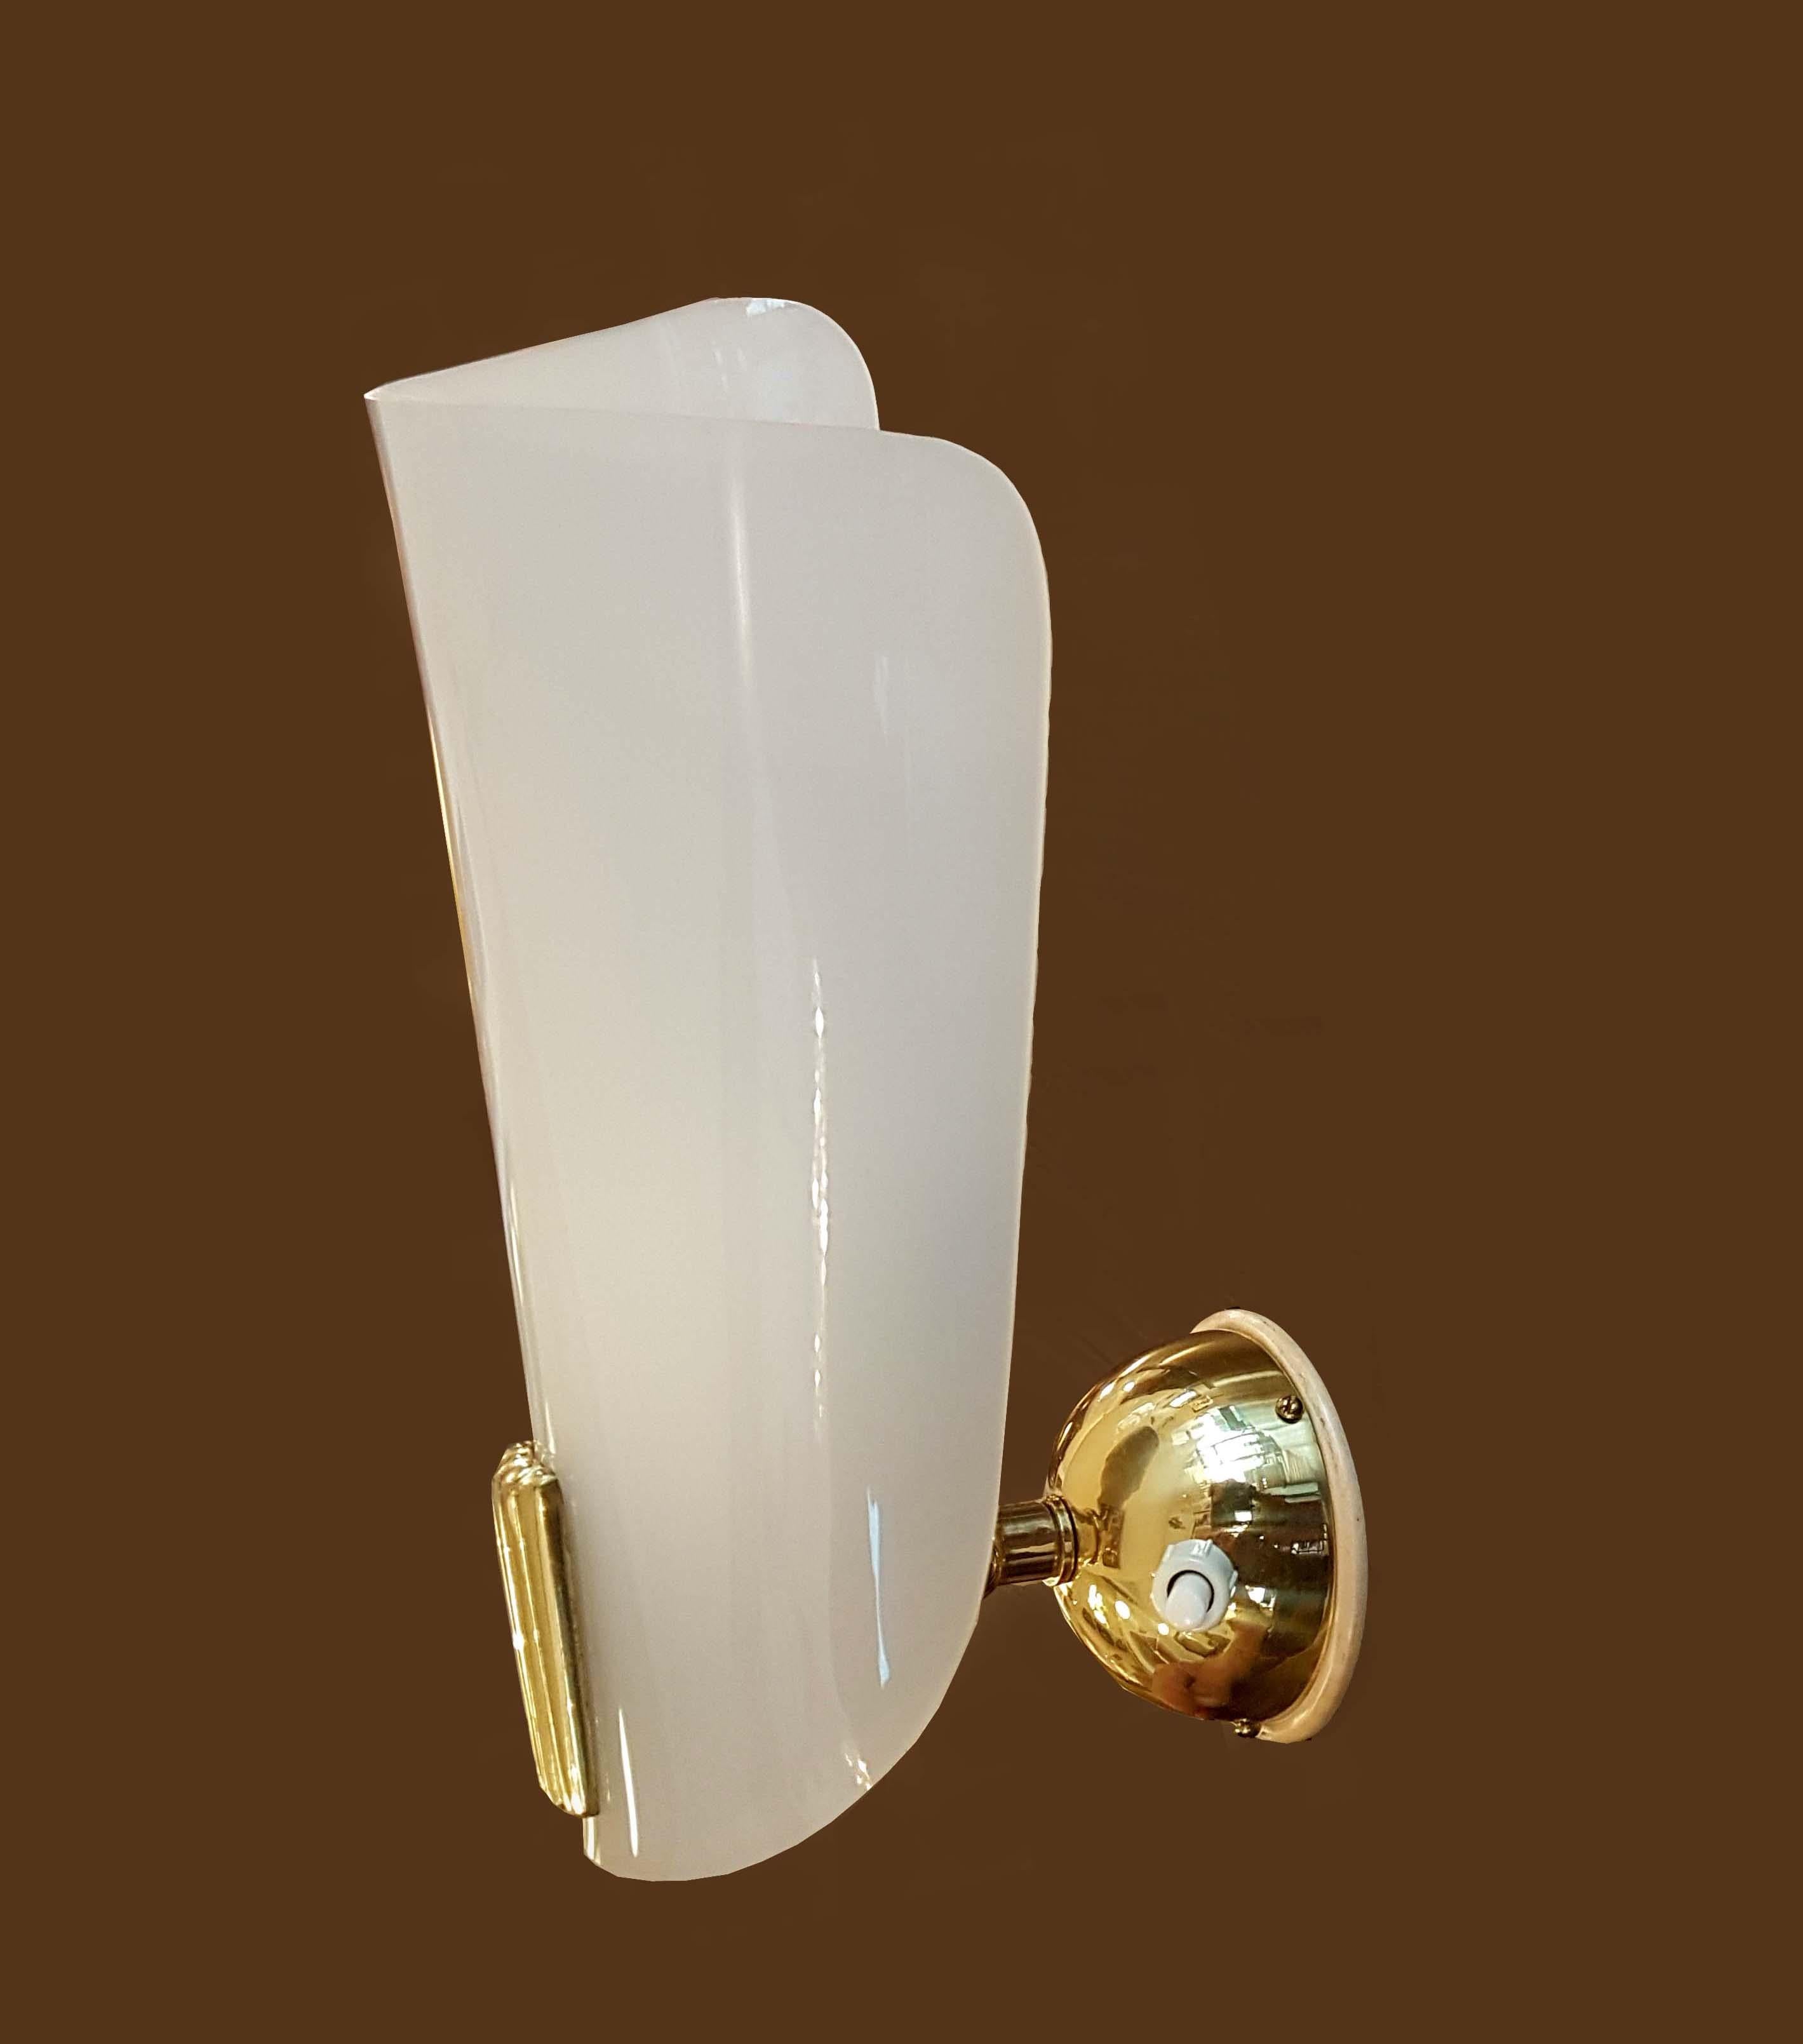 Pair of wall sconces,
designed Rupert Nikoll,
Vienna, 1950
brass with white Lucite shades.